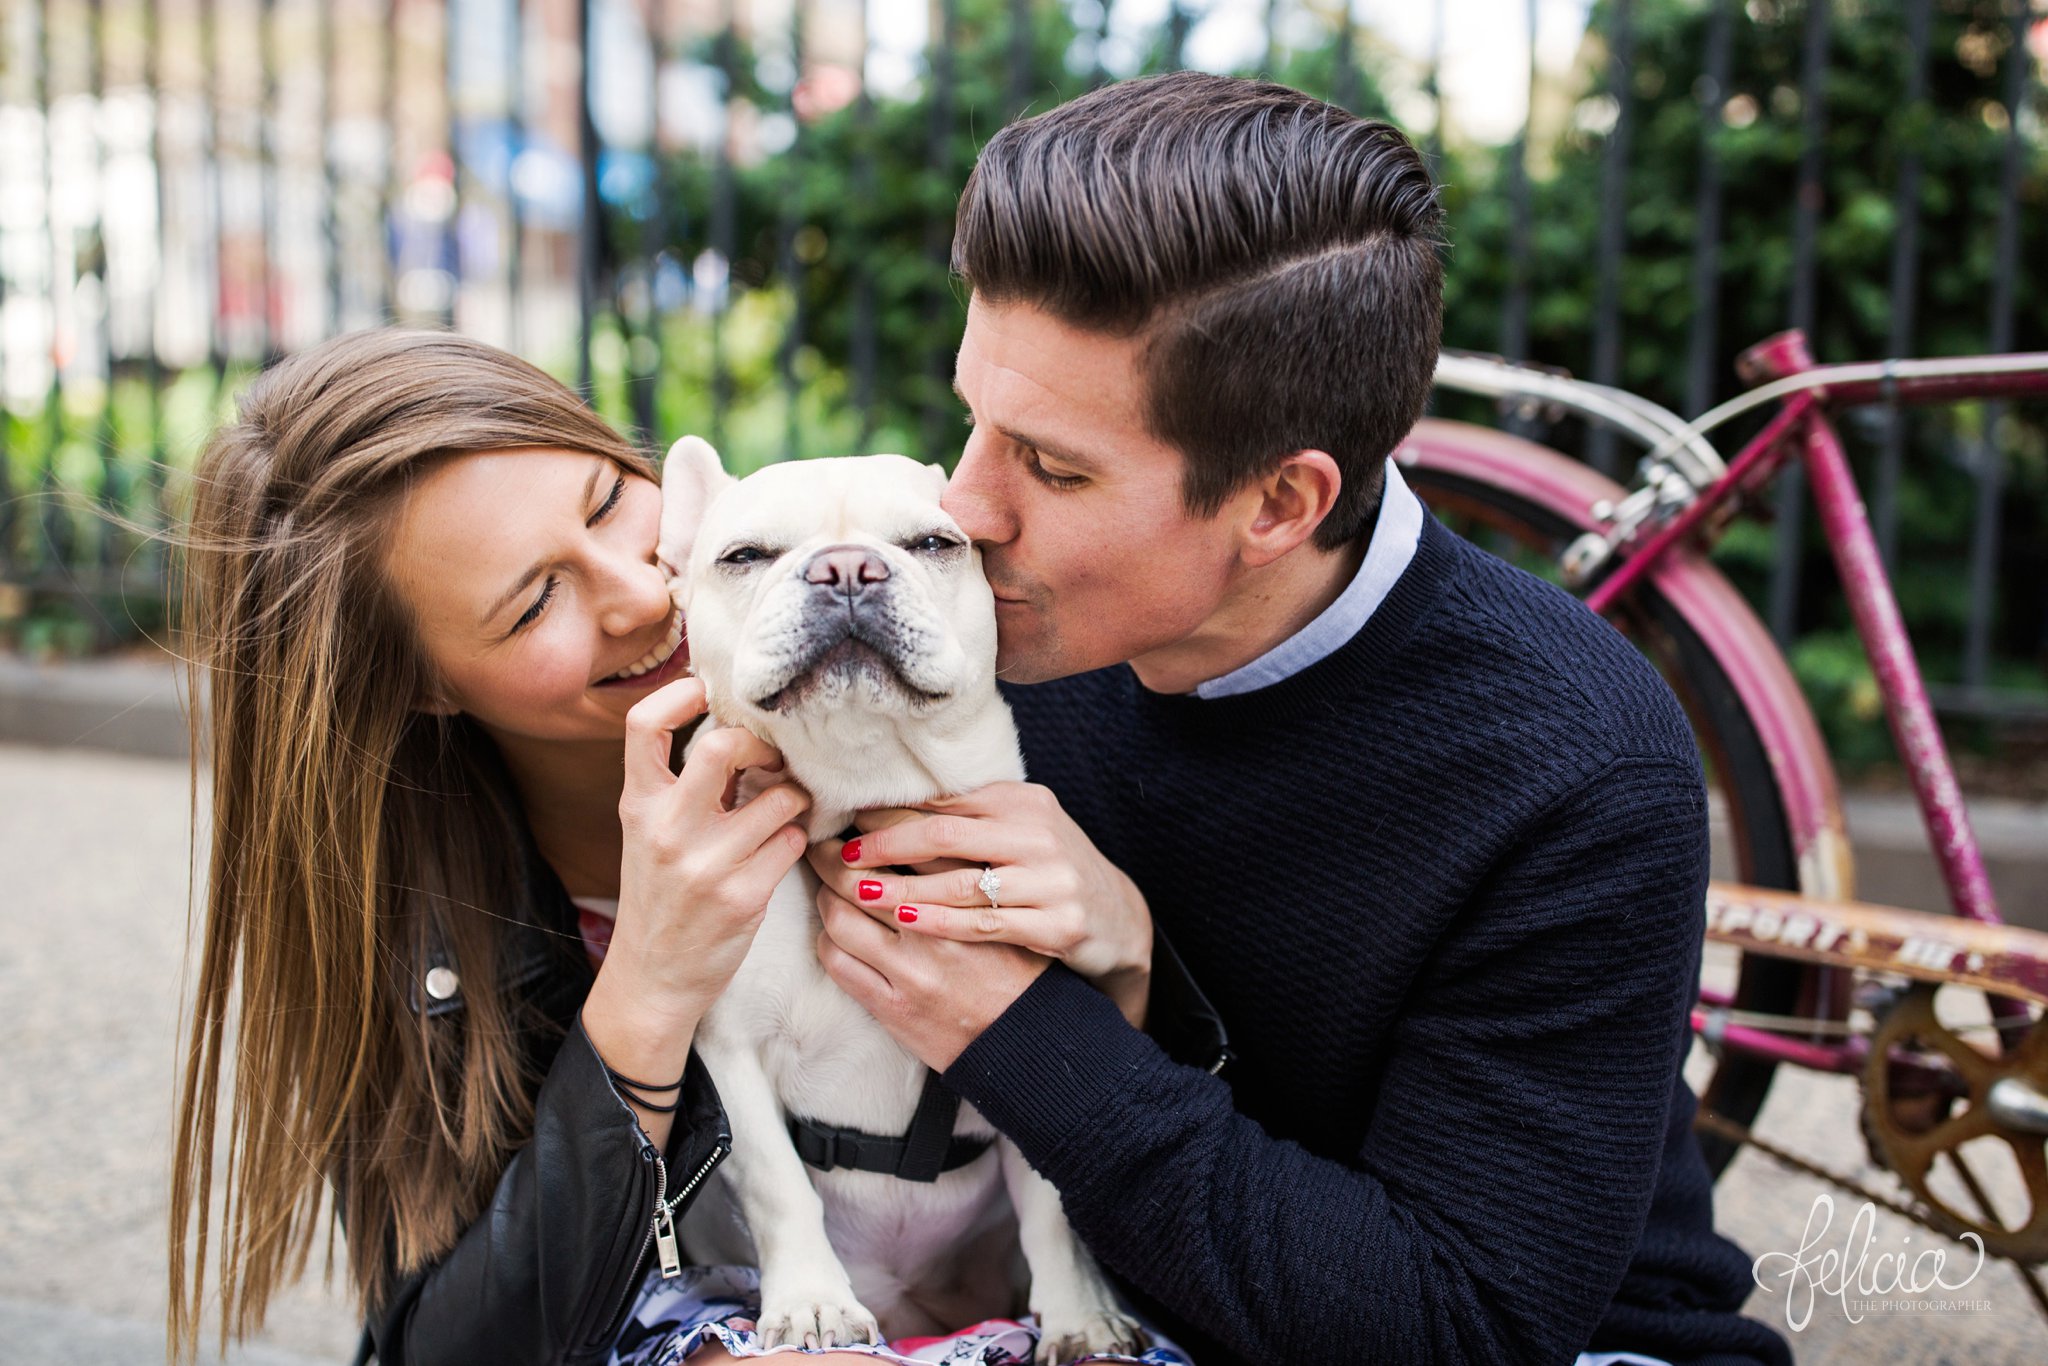 kissing dog | laughing bride and groom | engagement ring | smiling bride and groom | close up | diamond ring | red fingernails with engagement ring | New York City Photography | wedding | New York City | West Village | New York City photography | wedding photography | images by feliciathephotographer.com | French Bulldog | engagement photos | engagement pictures with dog | engagement pictures in park | vintage bicycle | red bicycle 